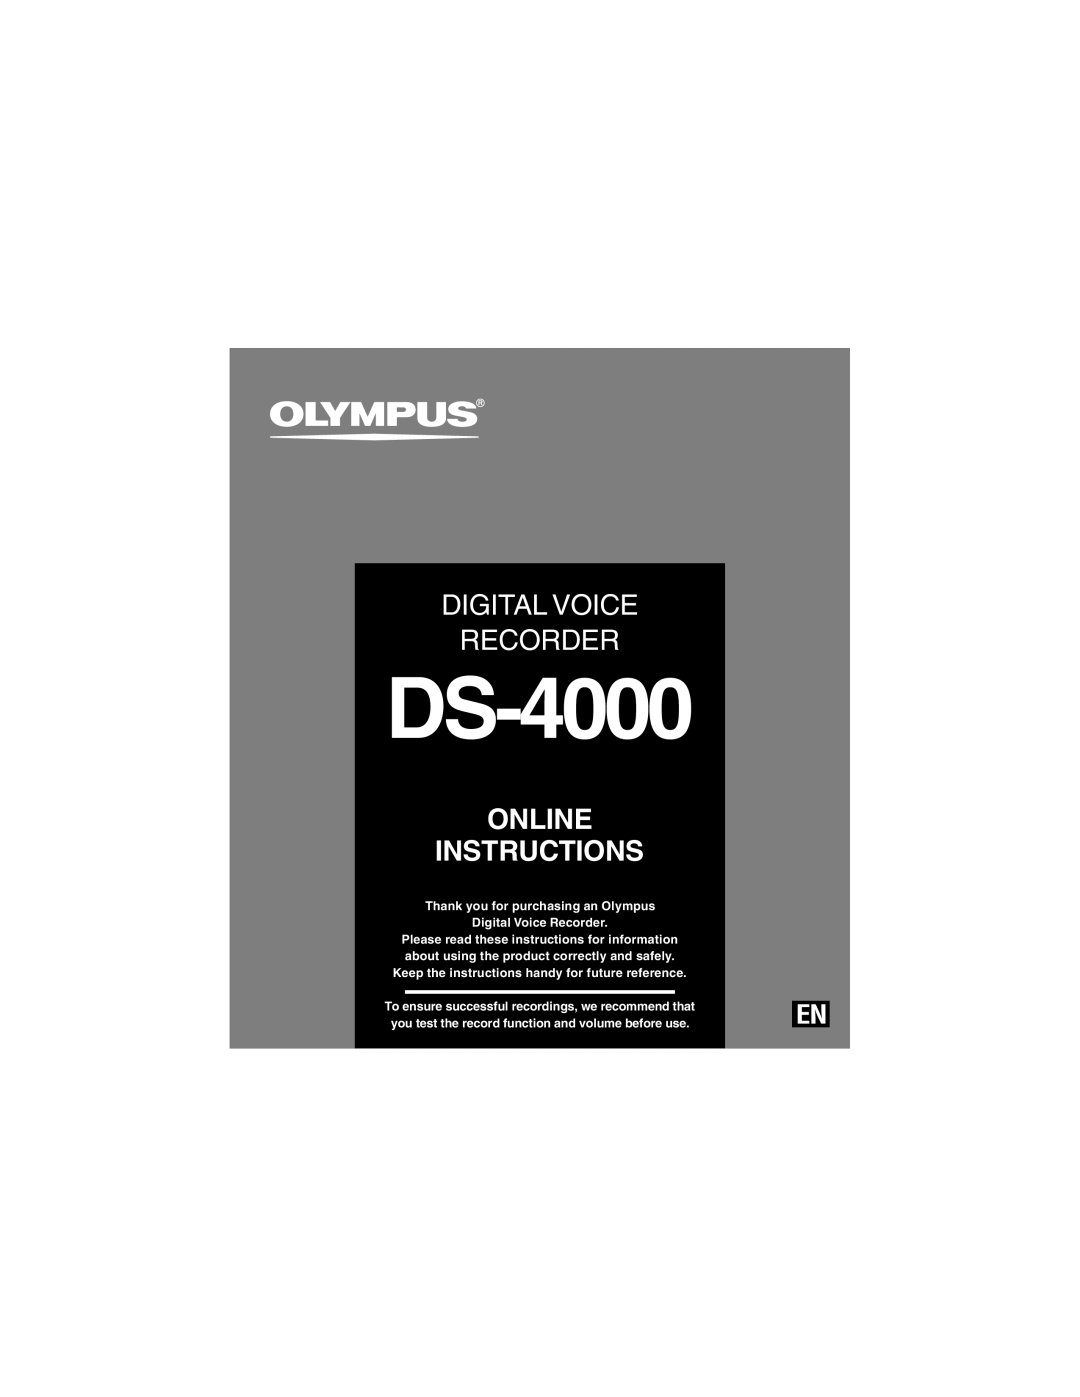 Olympus DS-4000 manual Digital Voice Recorder, Online Instructions, Keep the instructions handy for future reference 